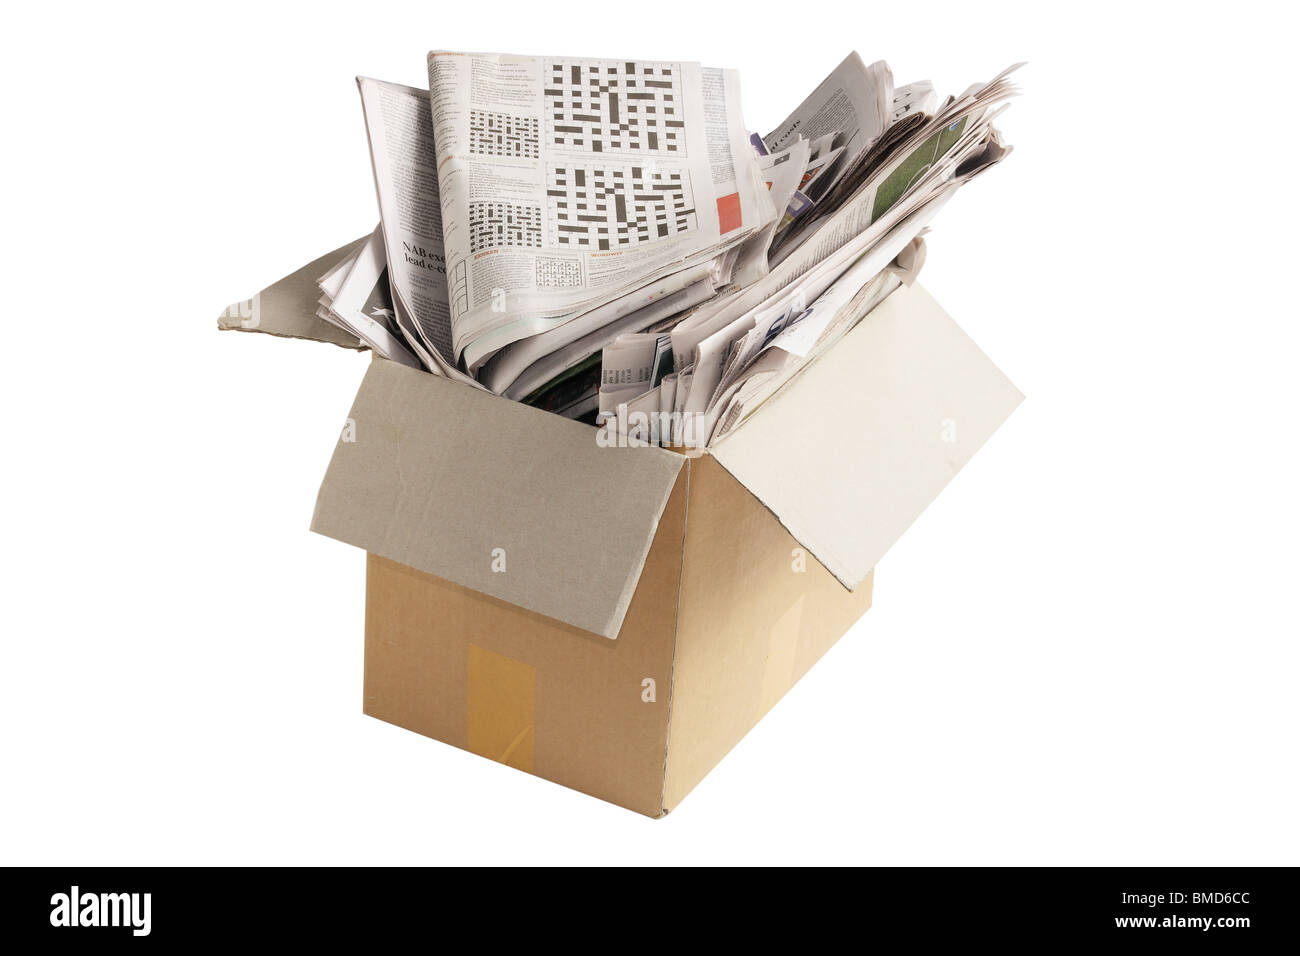 Old Newspapers in Cardboard Box Stock Photo